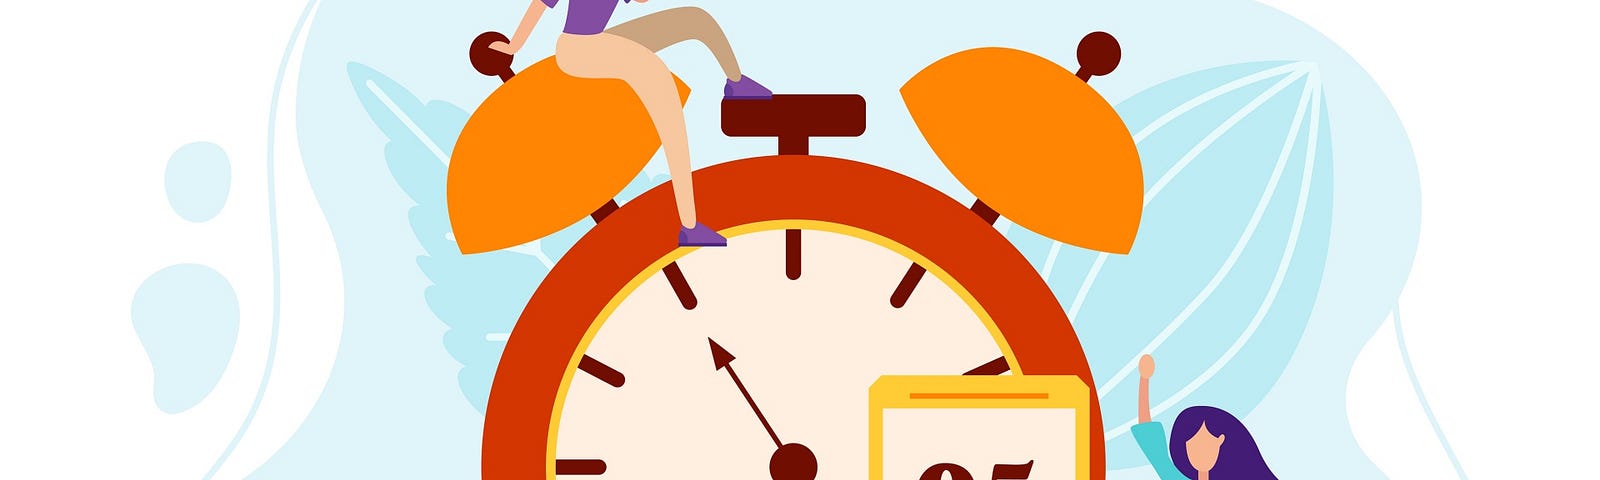 Daily morning routine — woman rise under the alarm clock on the phone. charging on the pillow and cheerful mood characters in flat style. vector illustration.